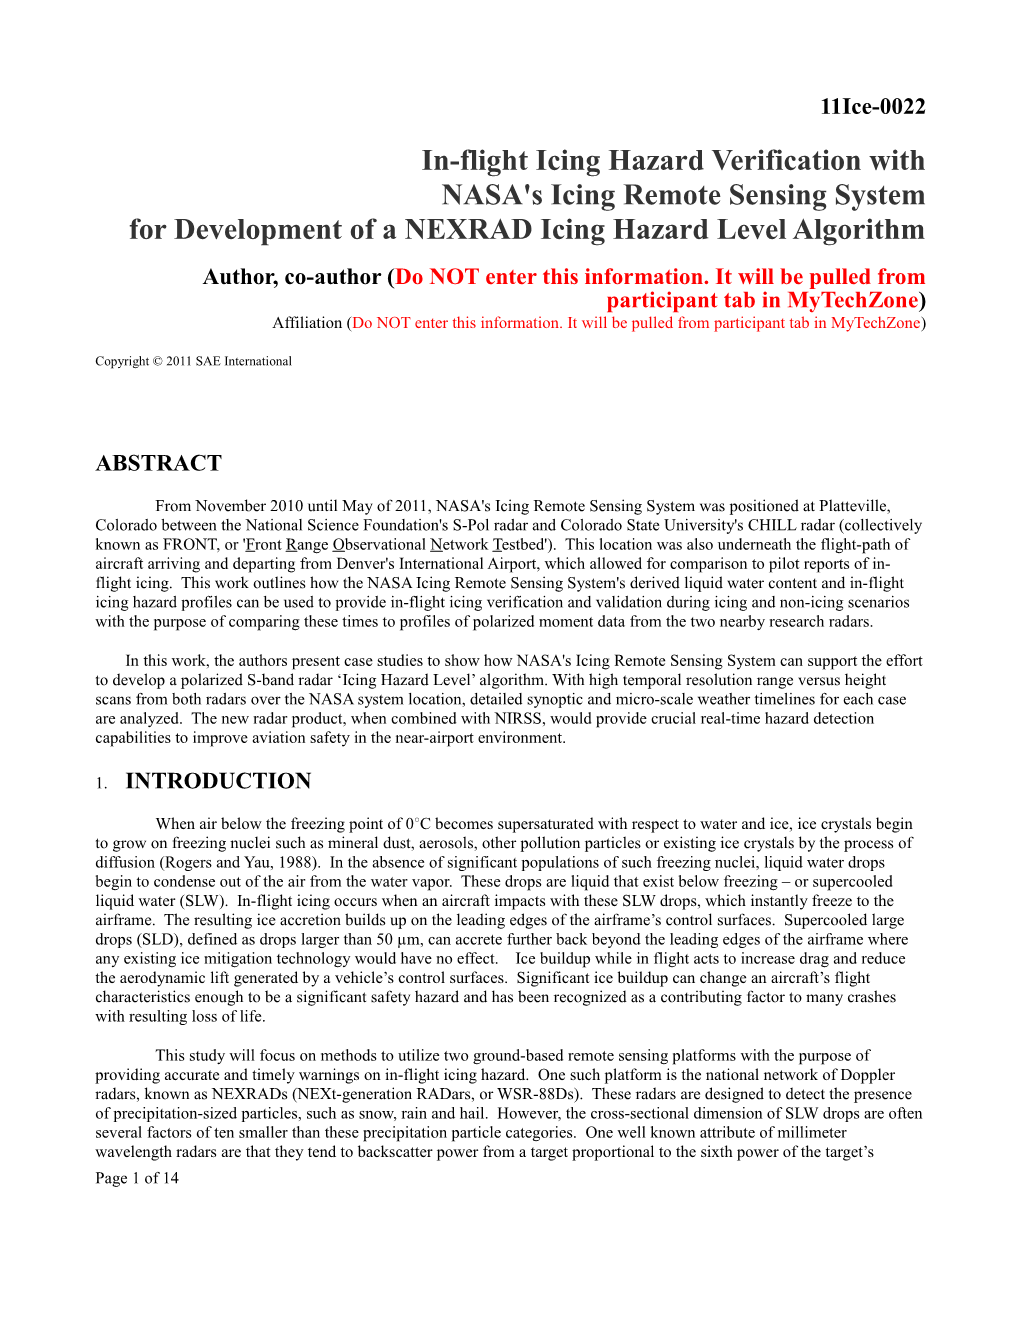 In-Flight Icing Hazard Verification with NASA's Icing Remote Sensing System for Development